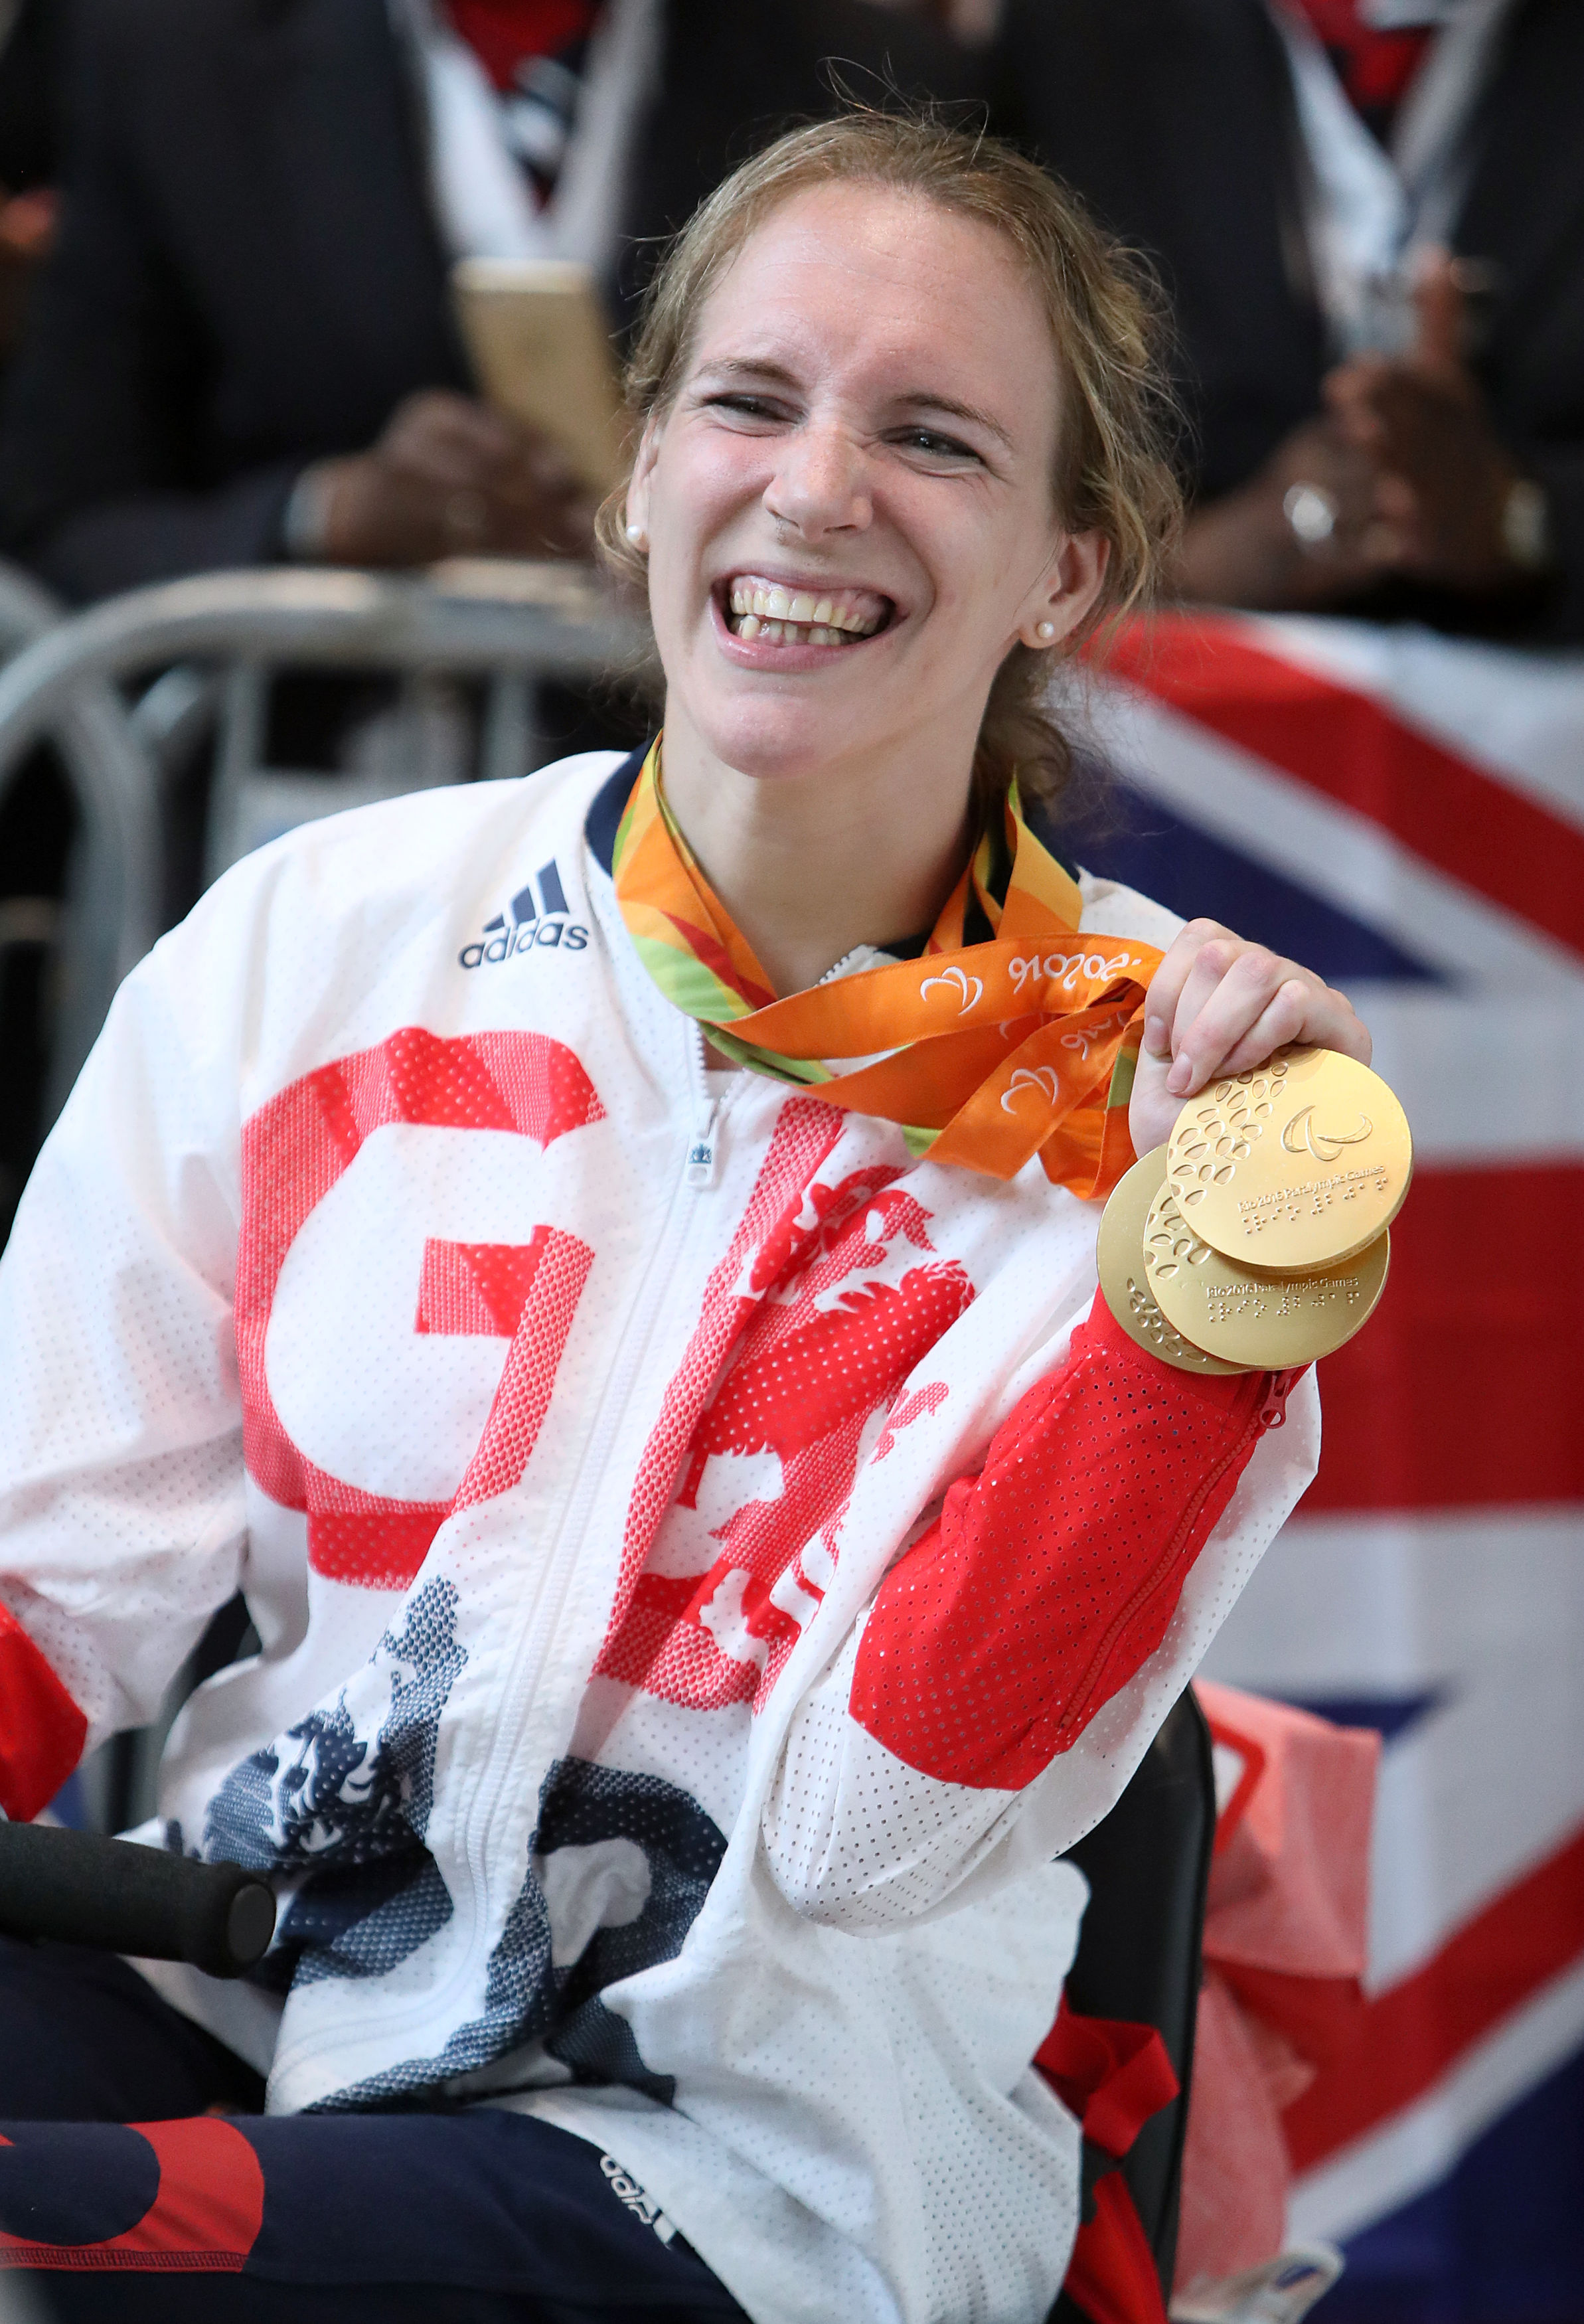 Sunningdale Paralympic equestrian star Sophie Christiansen shortlisted for BBC Sports Personality of the Year - Bracknell News